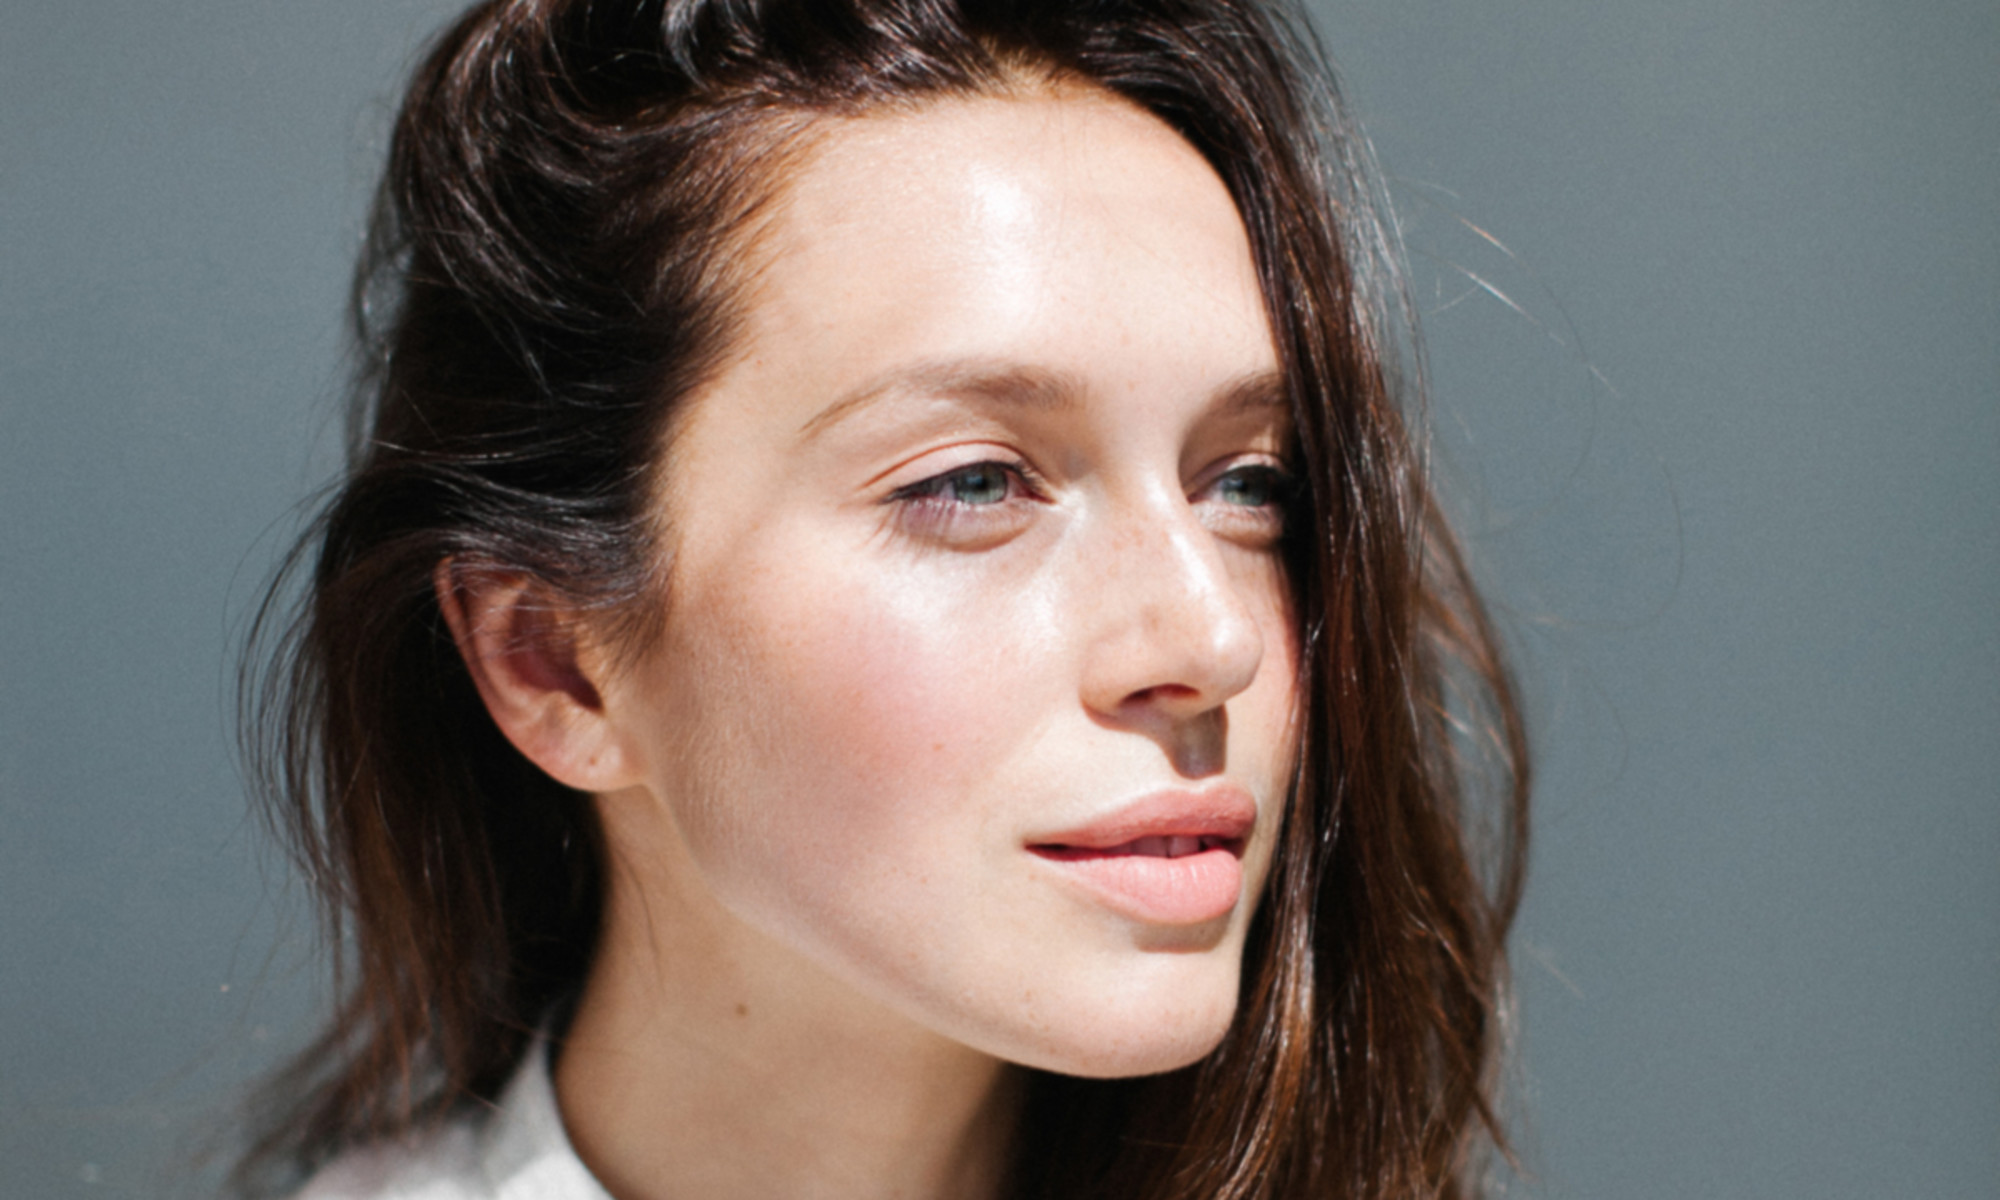 Want Brighter, Firmer Skin? 3 Changes To Make To Your Skin Care Routine